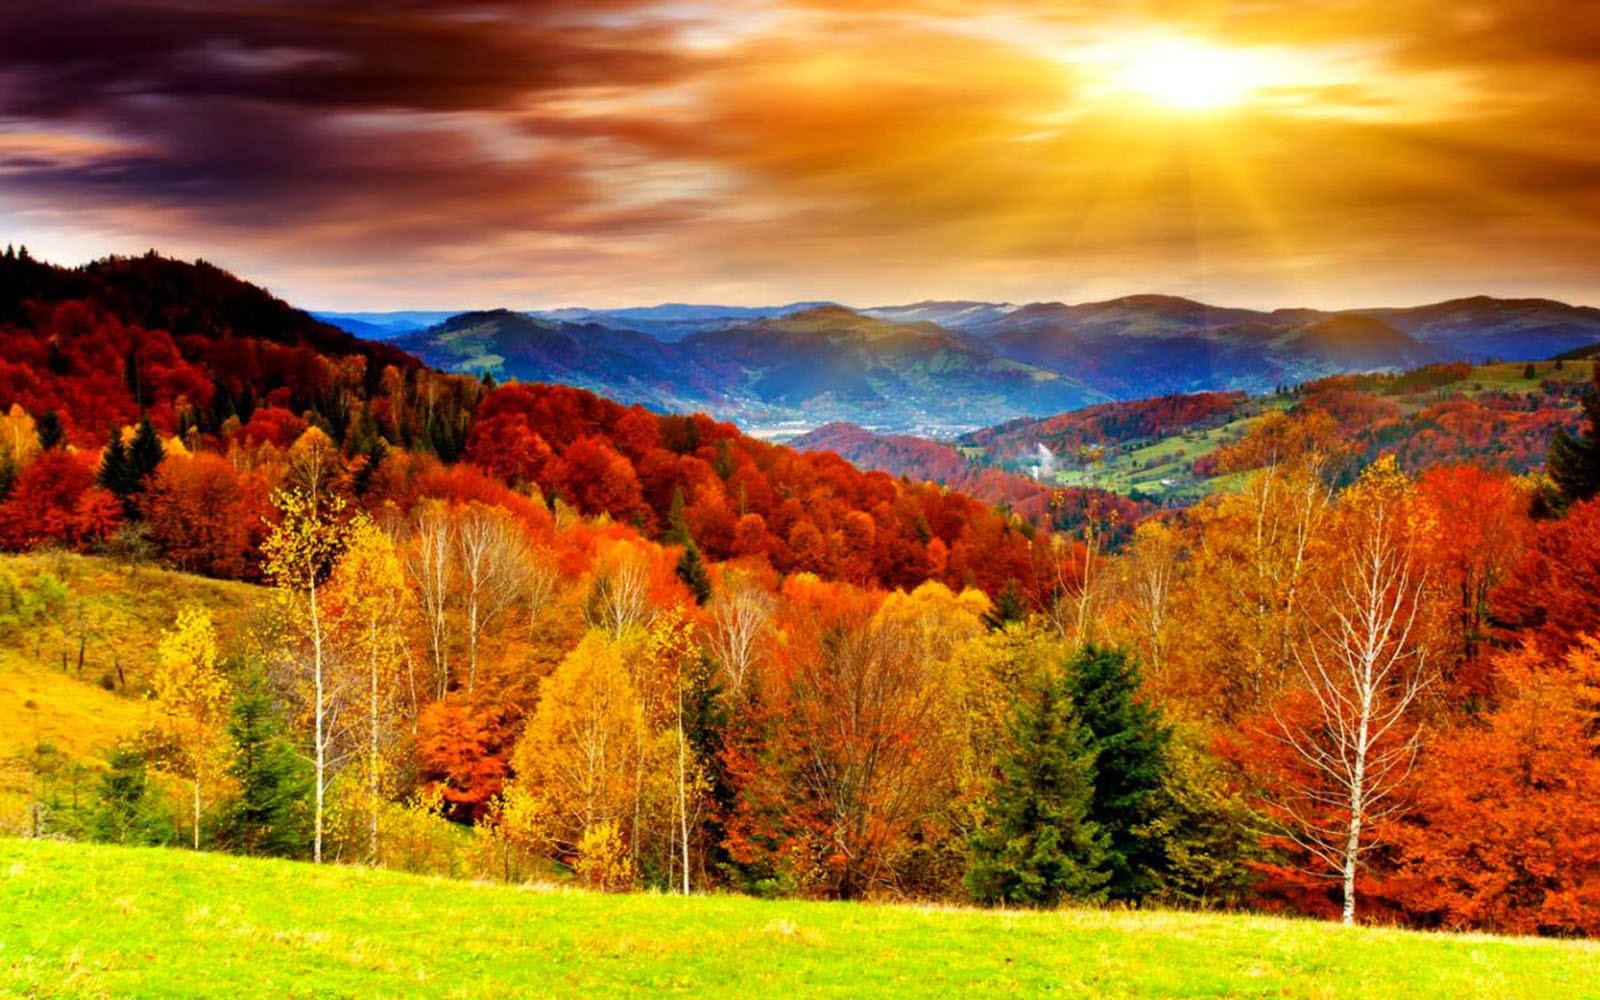 Tag Autumn Scenery Wallpapers Backgrounds Photos Images and 1600x1000